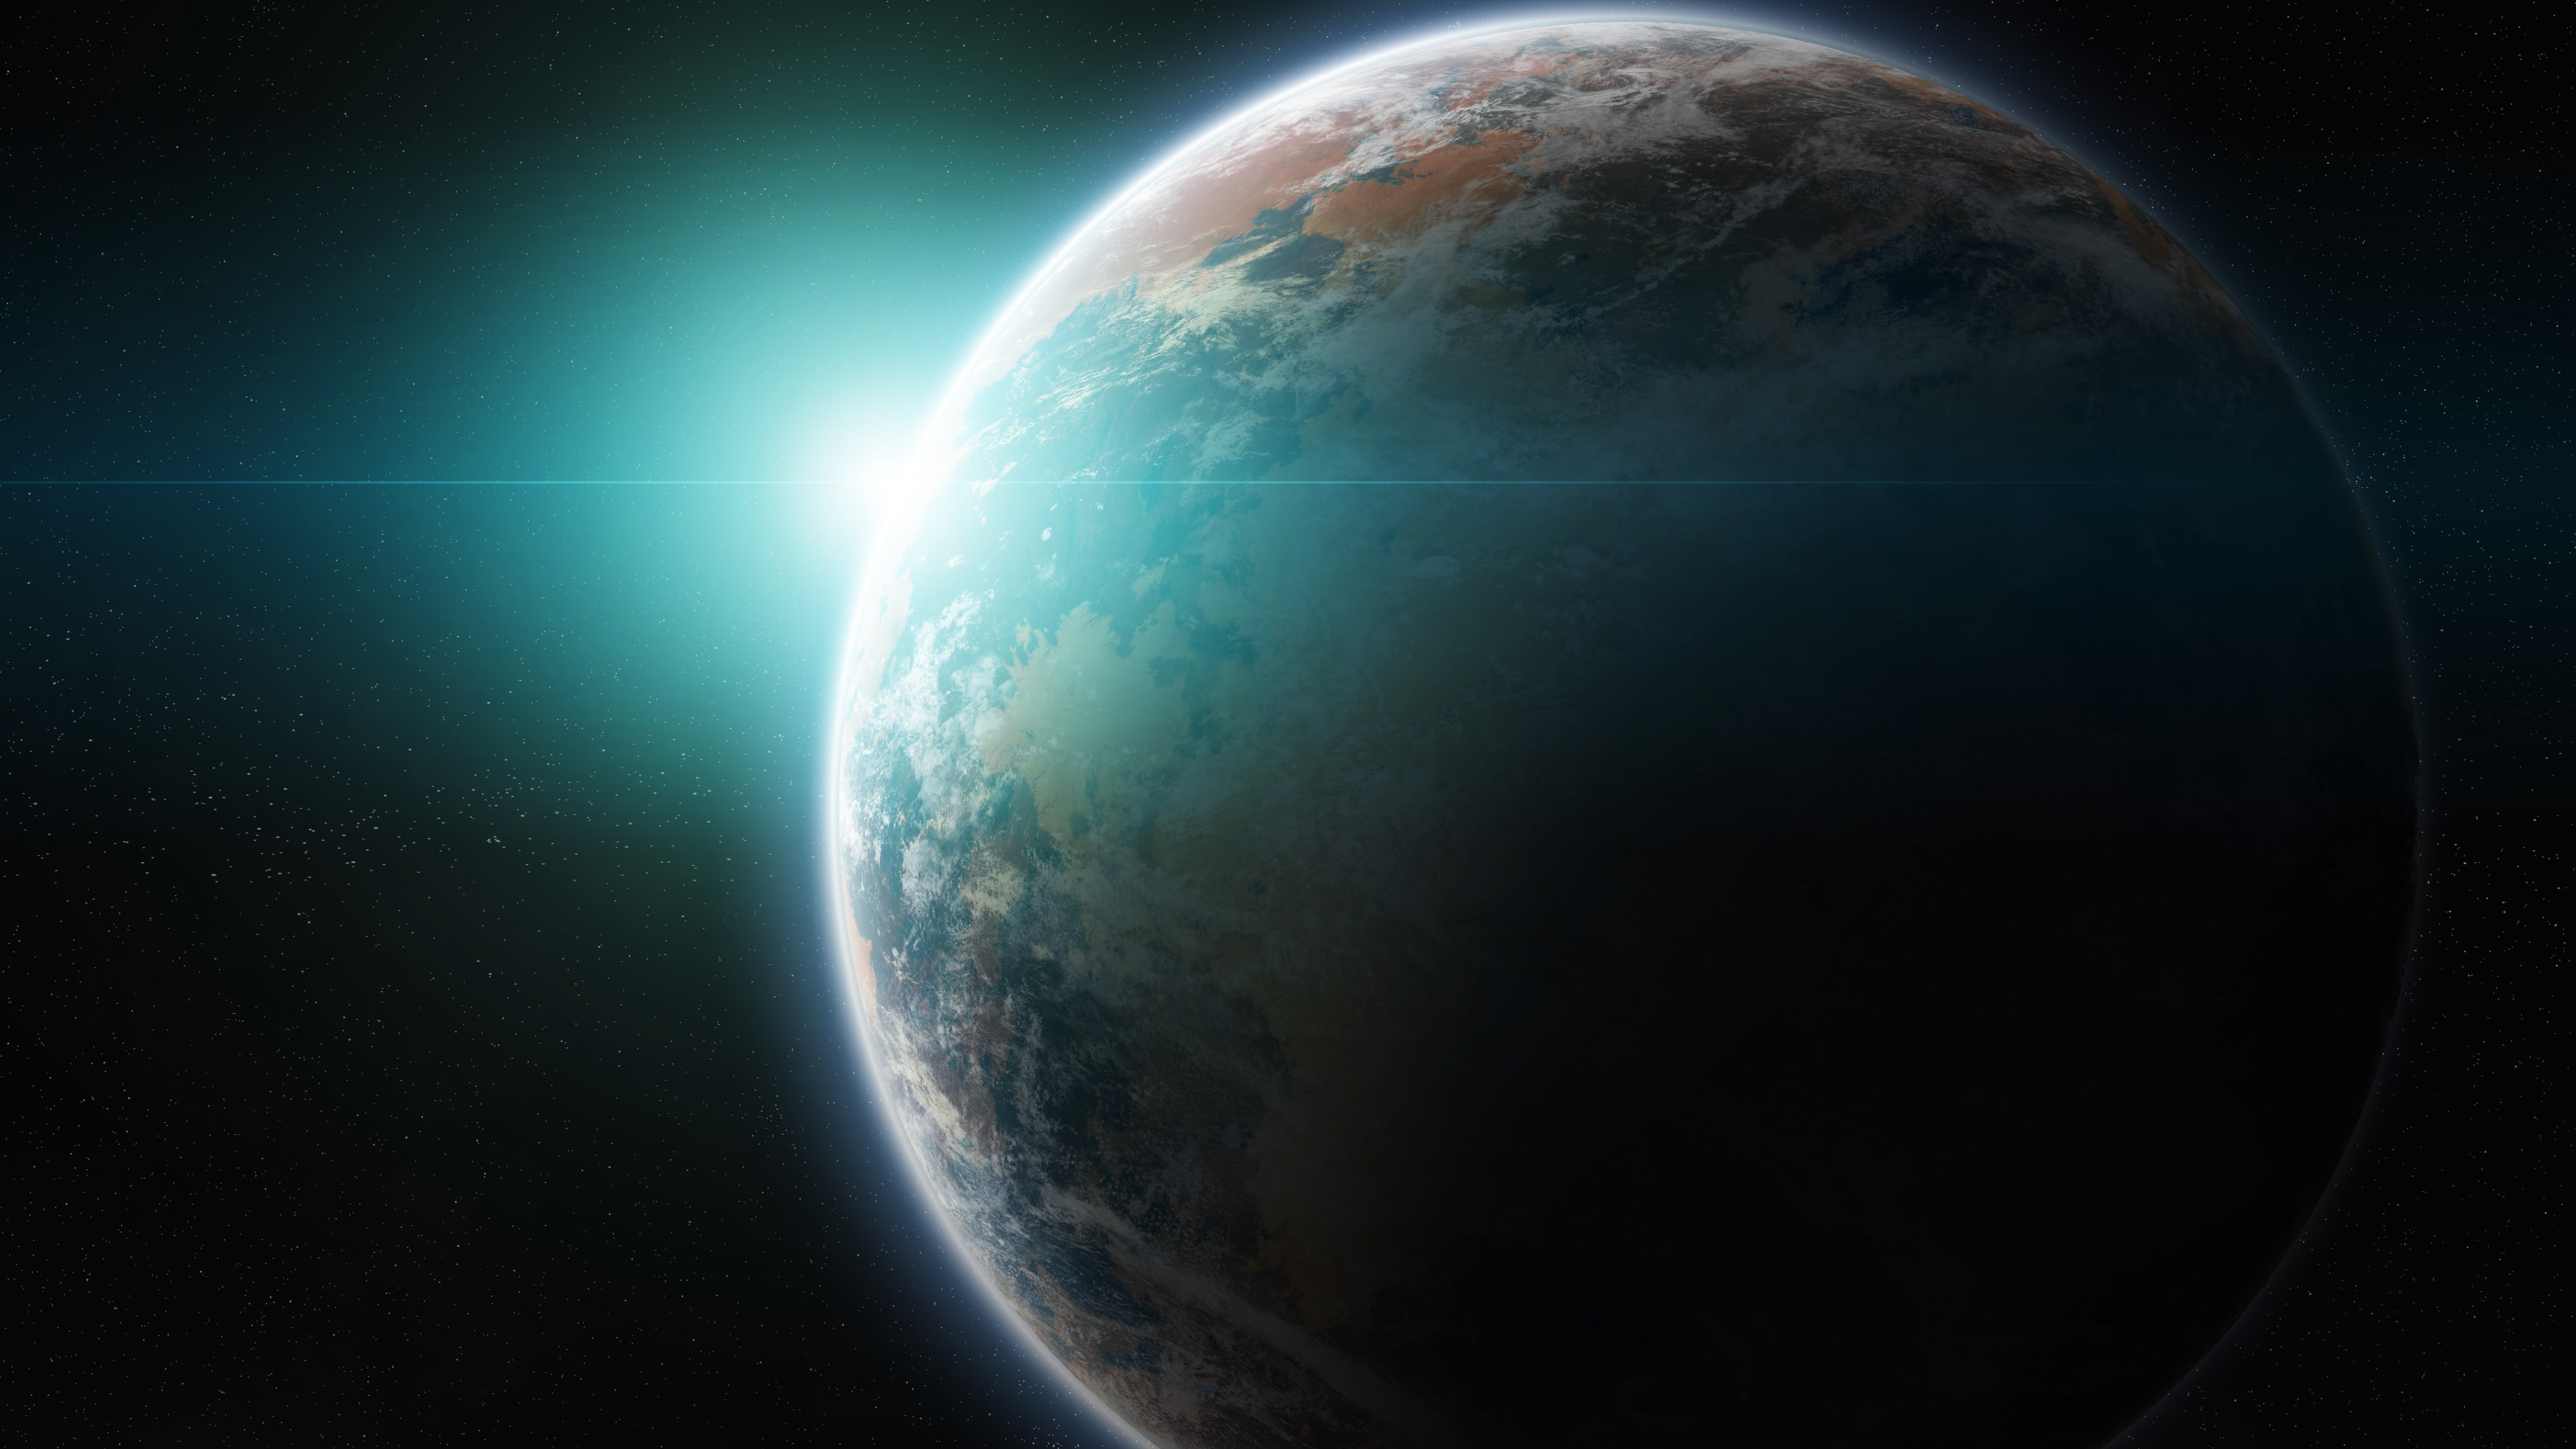 A realistic illustration of earth in space, bathed in sunlight with a visible blue glow from the GaiaSignatures atmosphere.